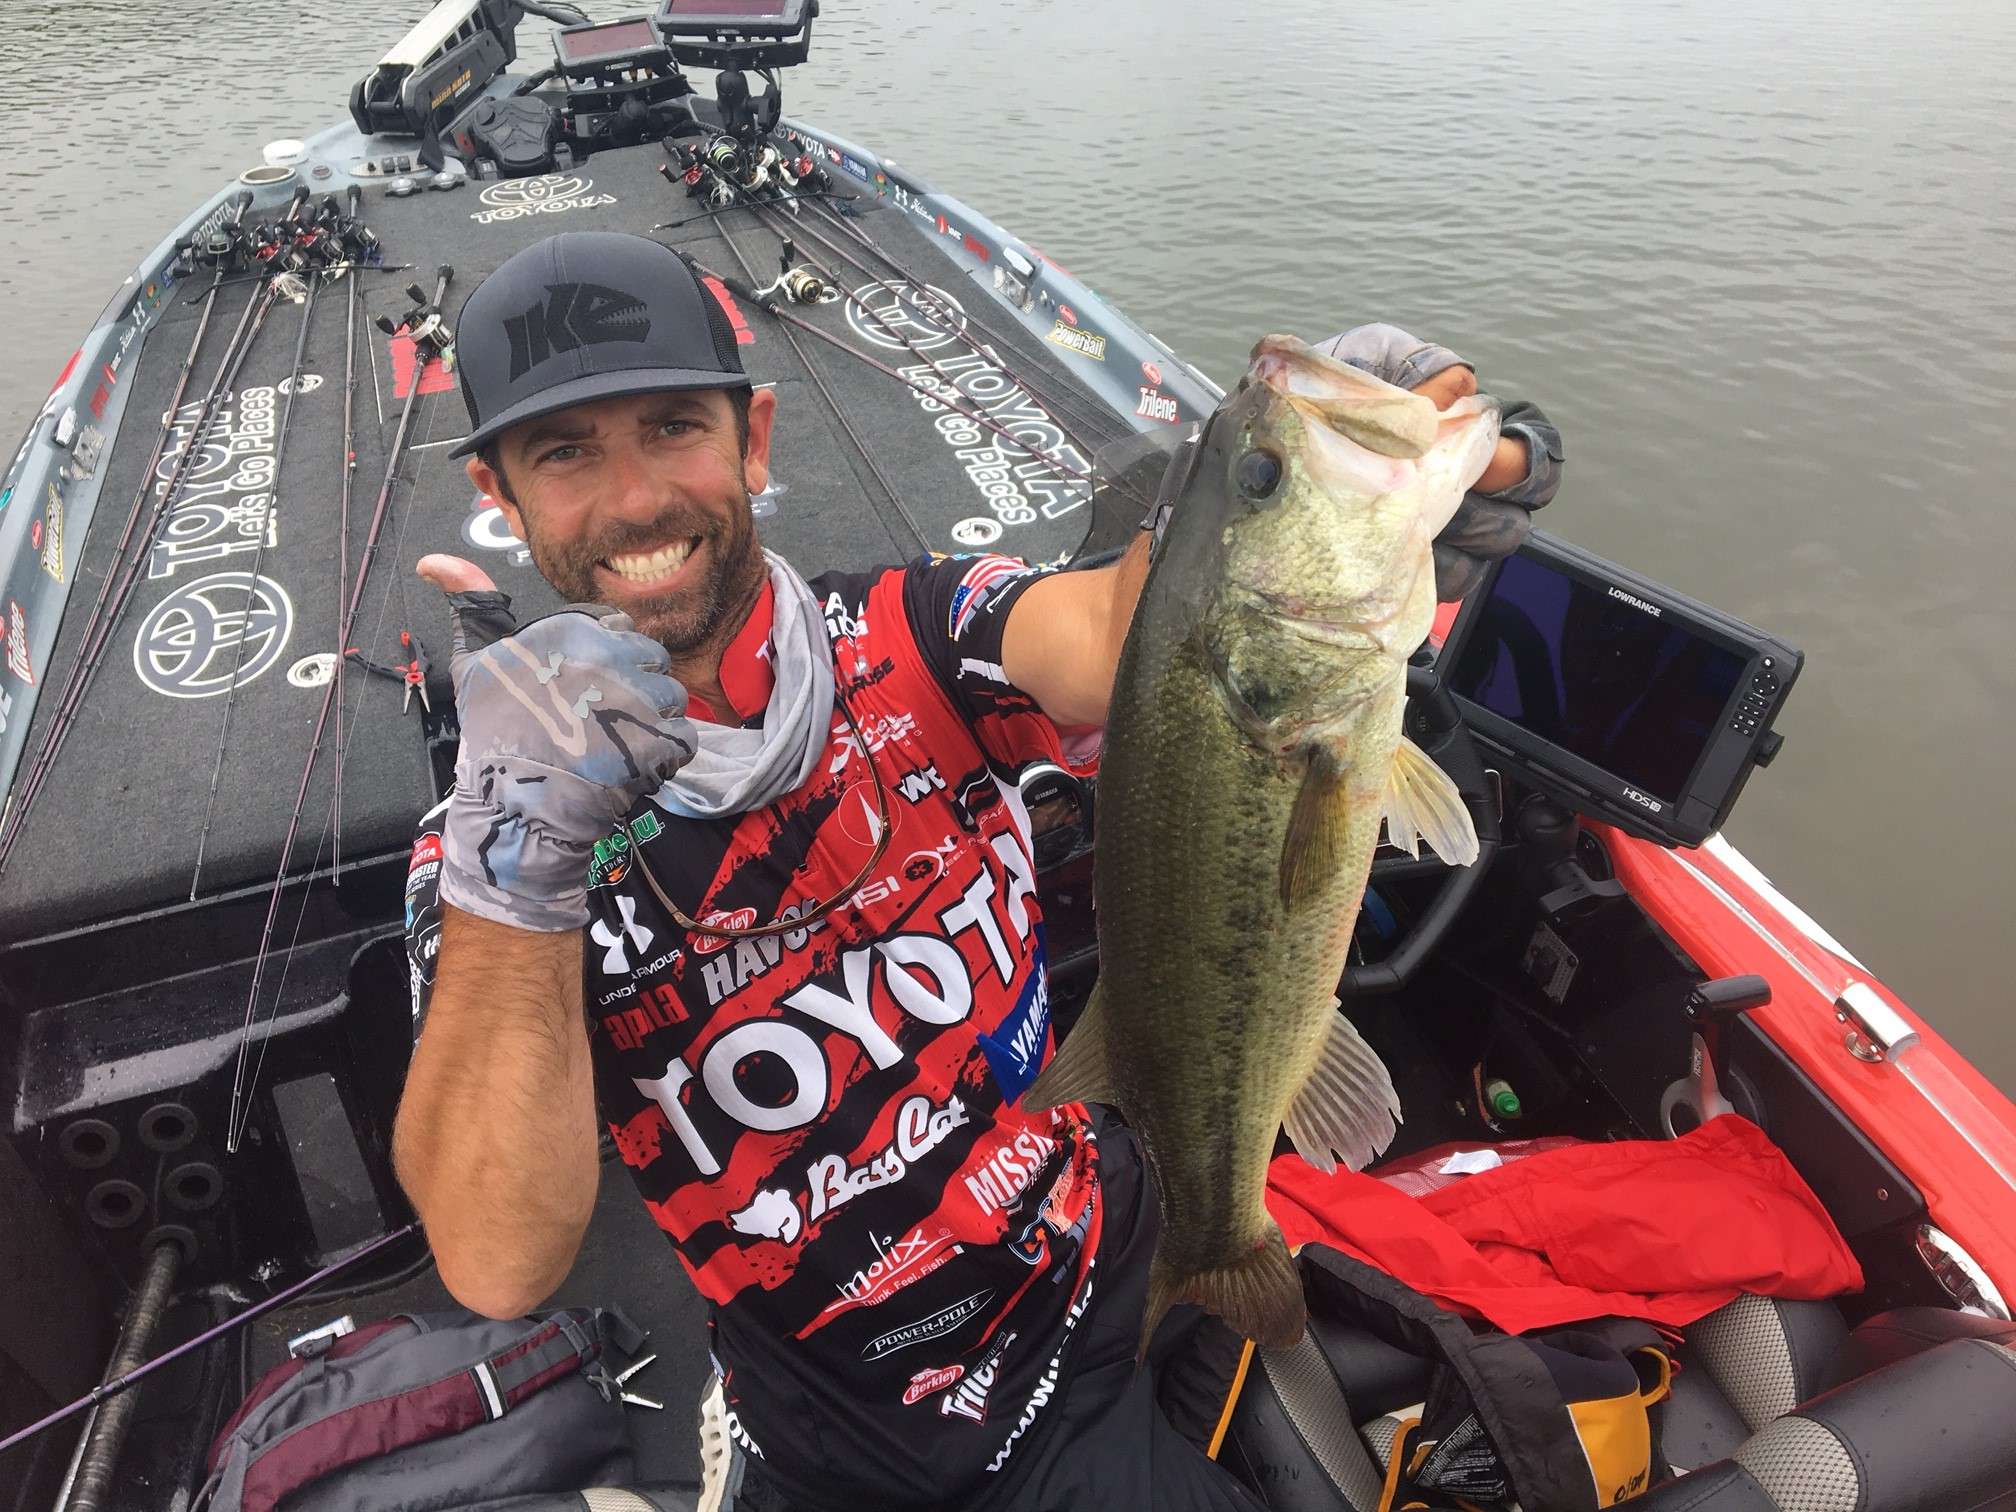 Mike Iaconelli makes a good upgrade.